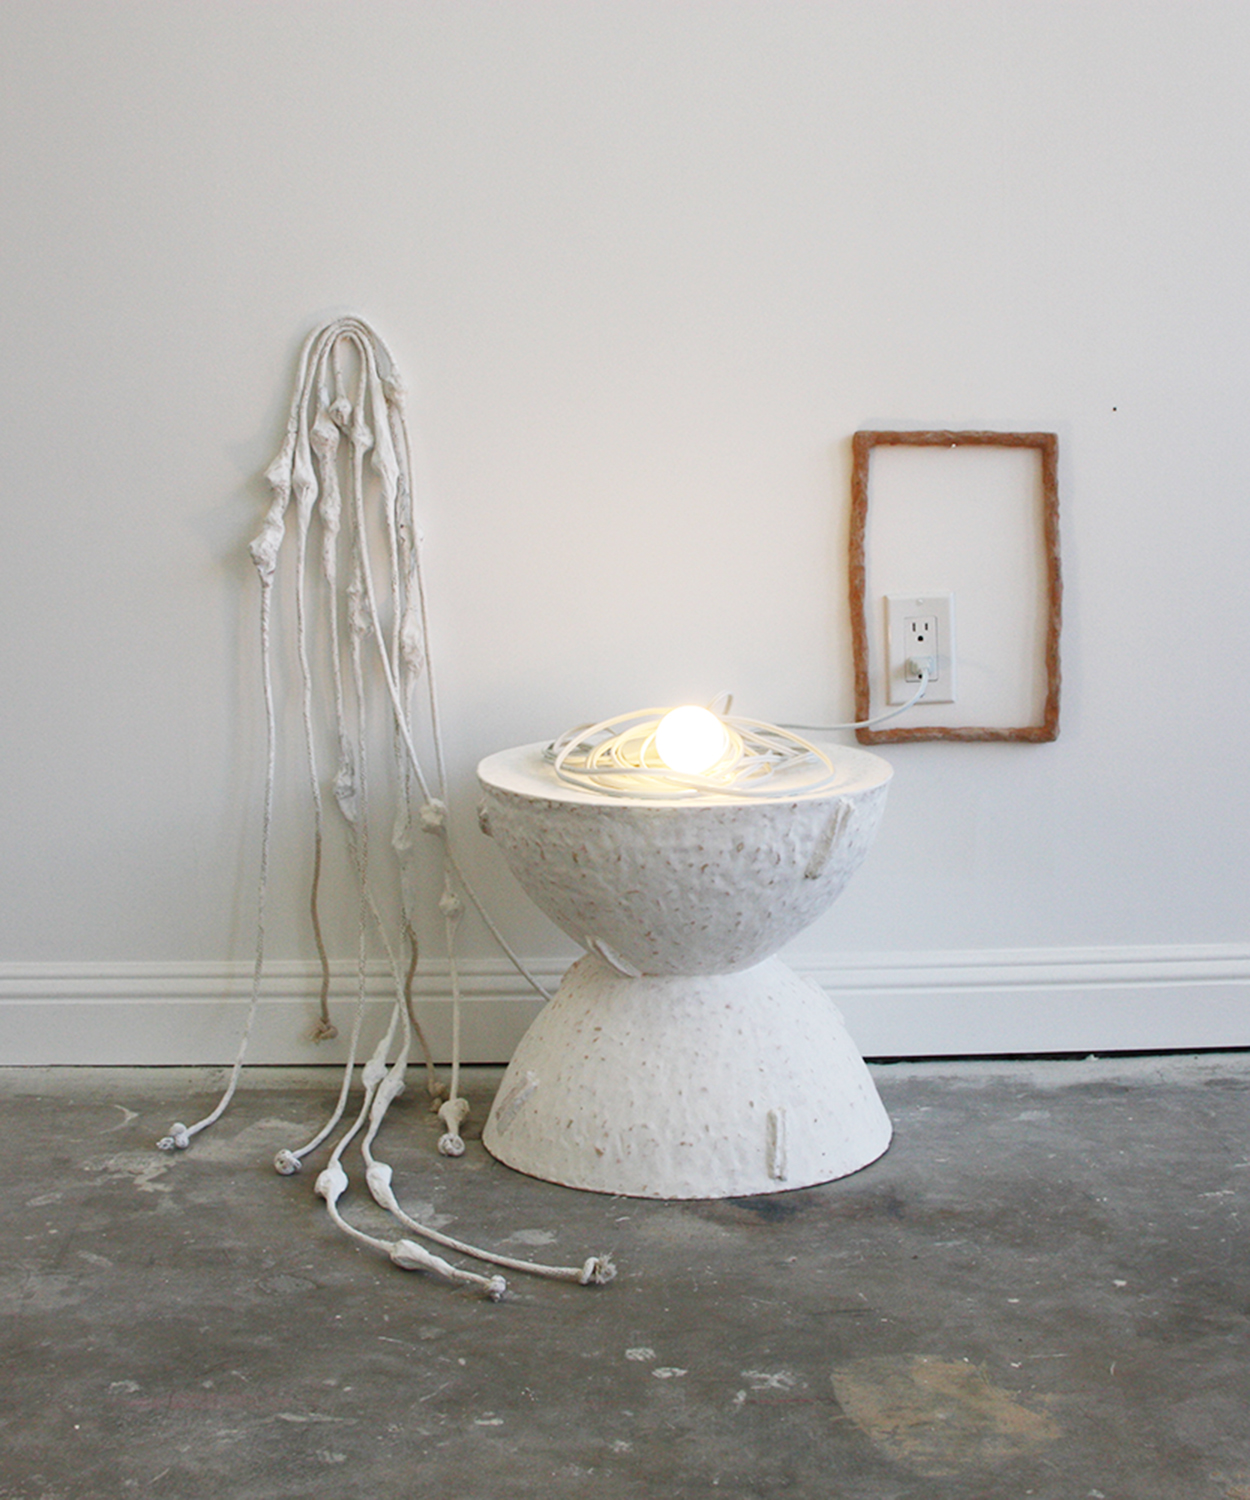   (Surface) Tension: A Release  Rope, ceramic, papier mâché, latex paint, light bulb Installation, dimensions vary 